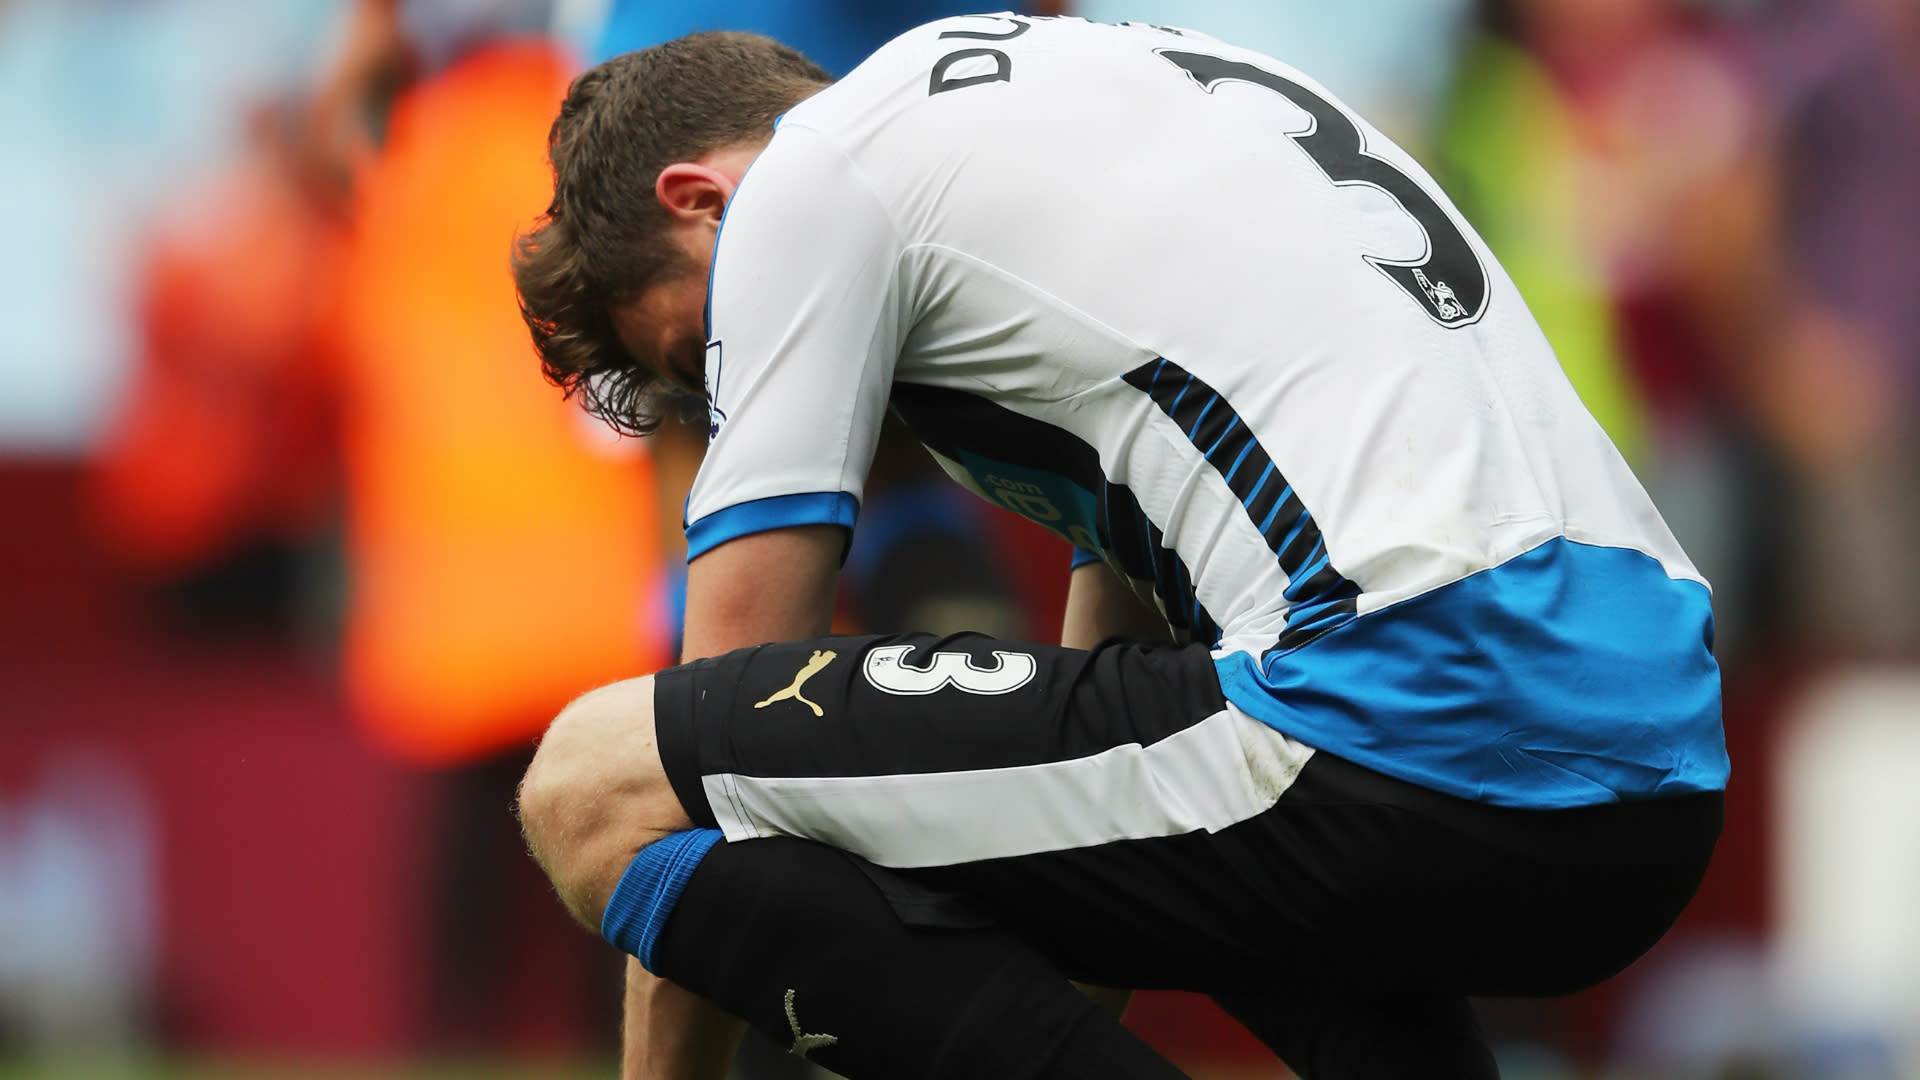 Newcastle players 'gutted' by Premier League relegation1920 x 1080